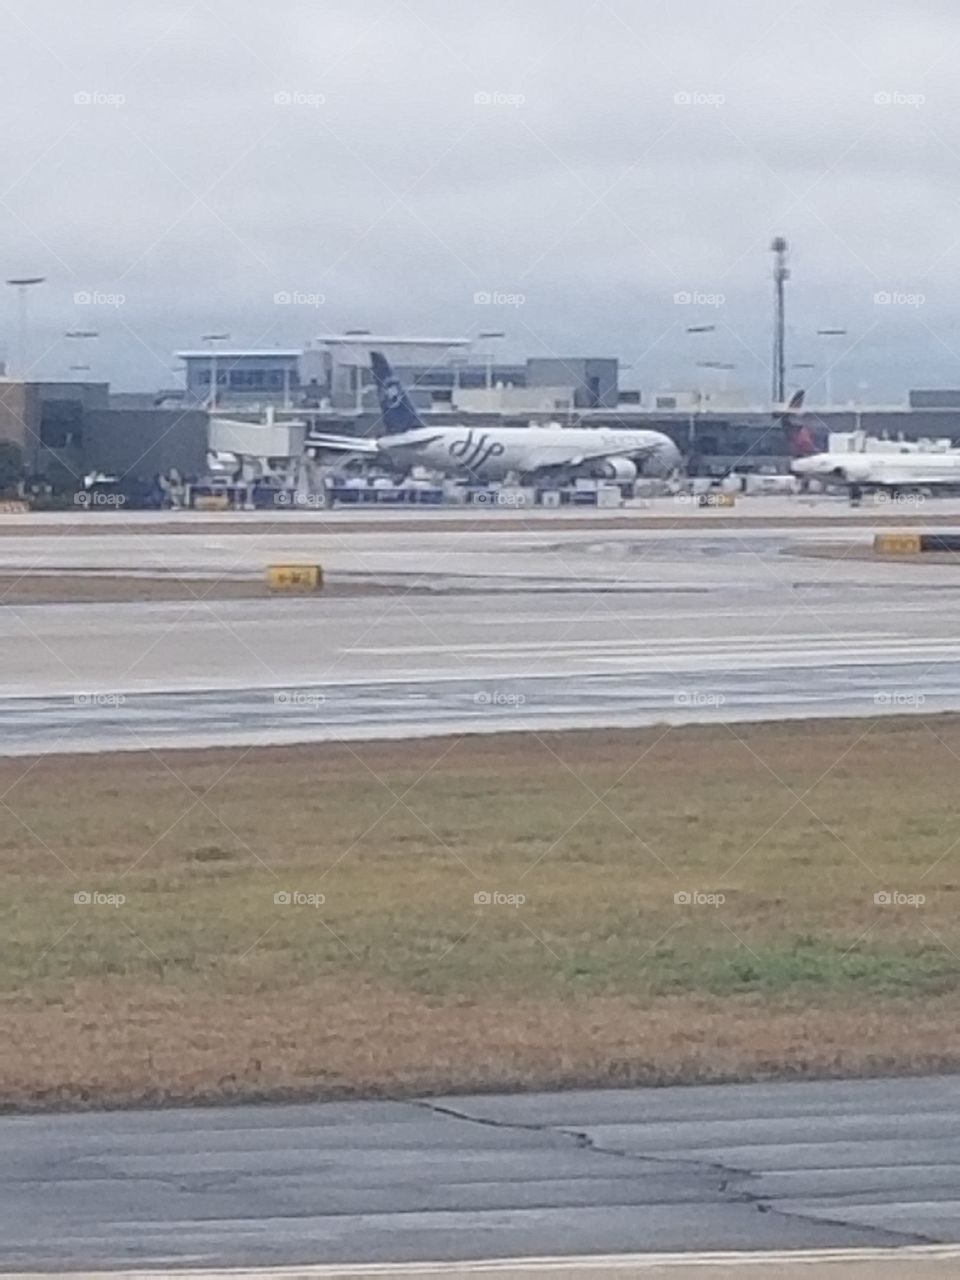 767 Delta Skyteam at the ramp.